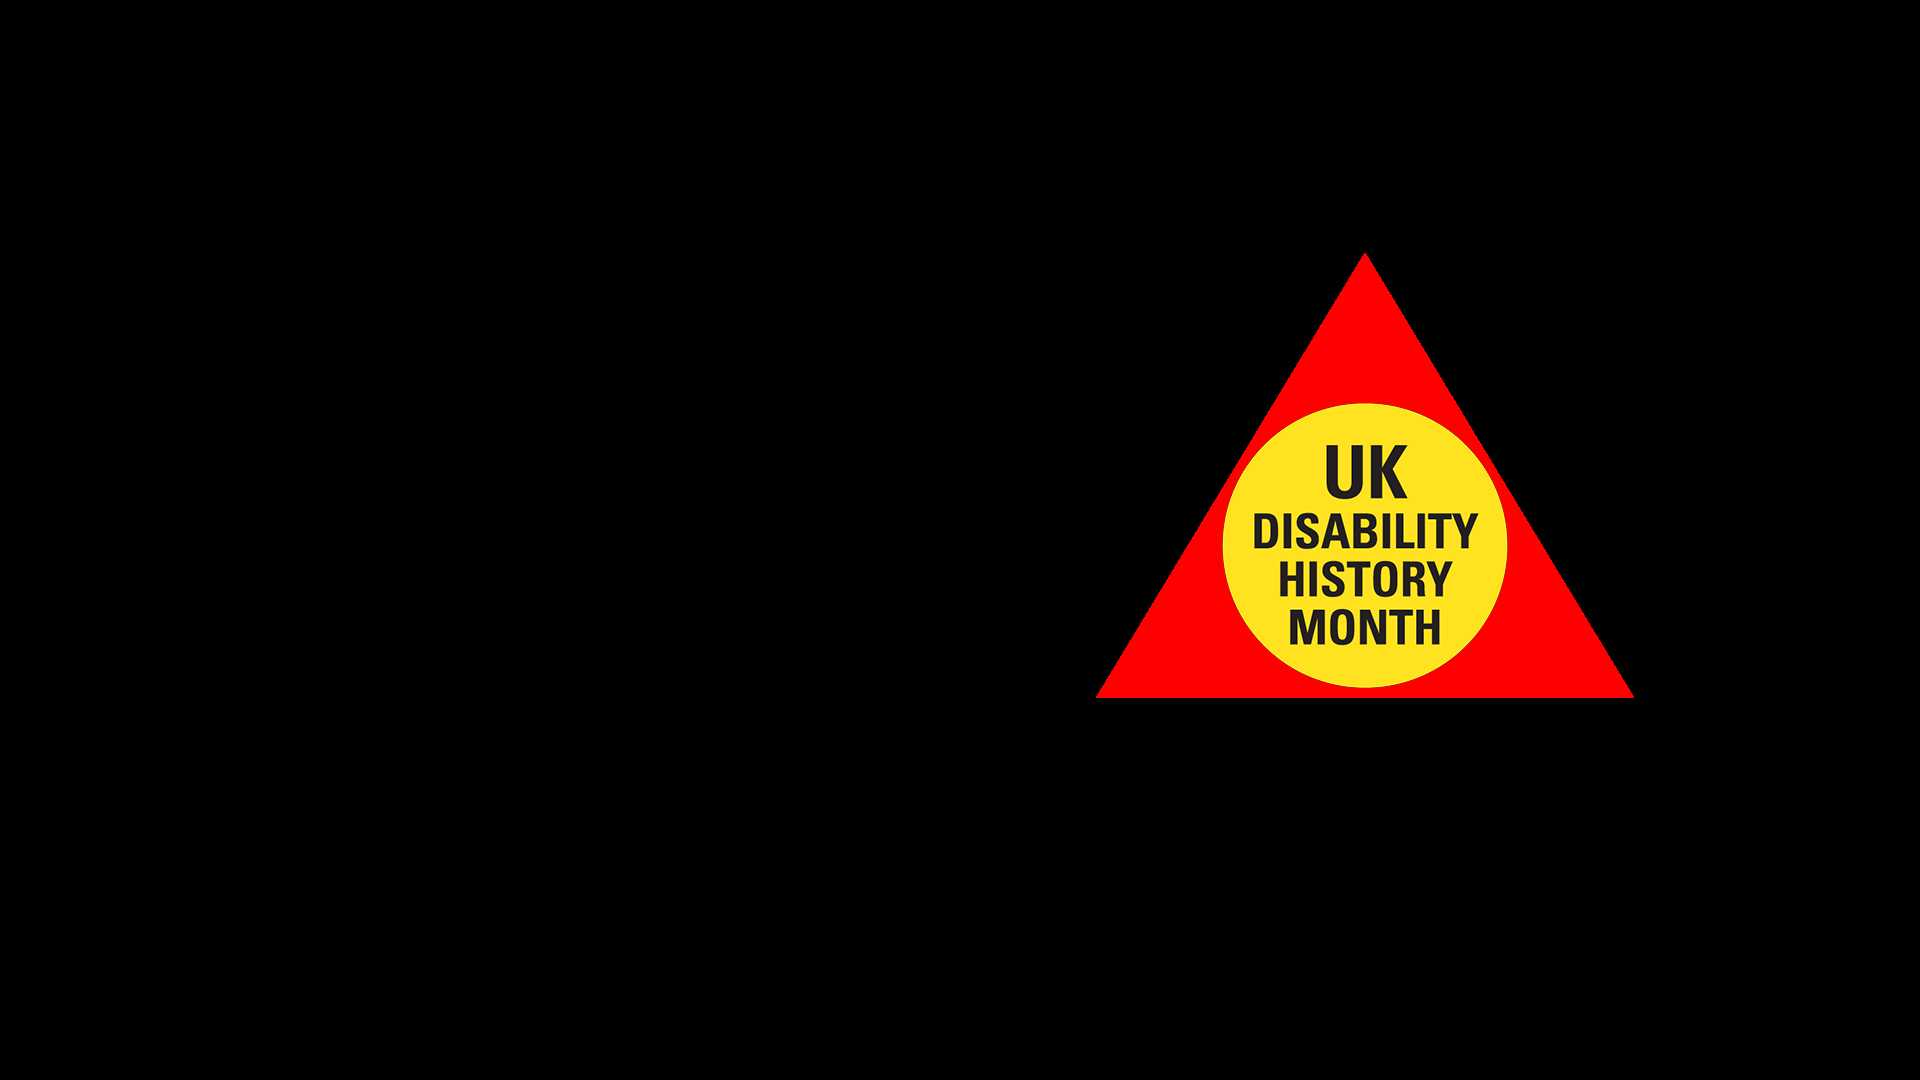 Disability history month logo - black background with red triangle containing yellow circle